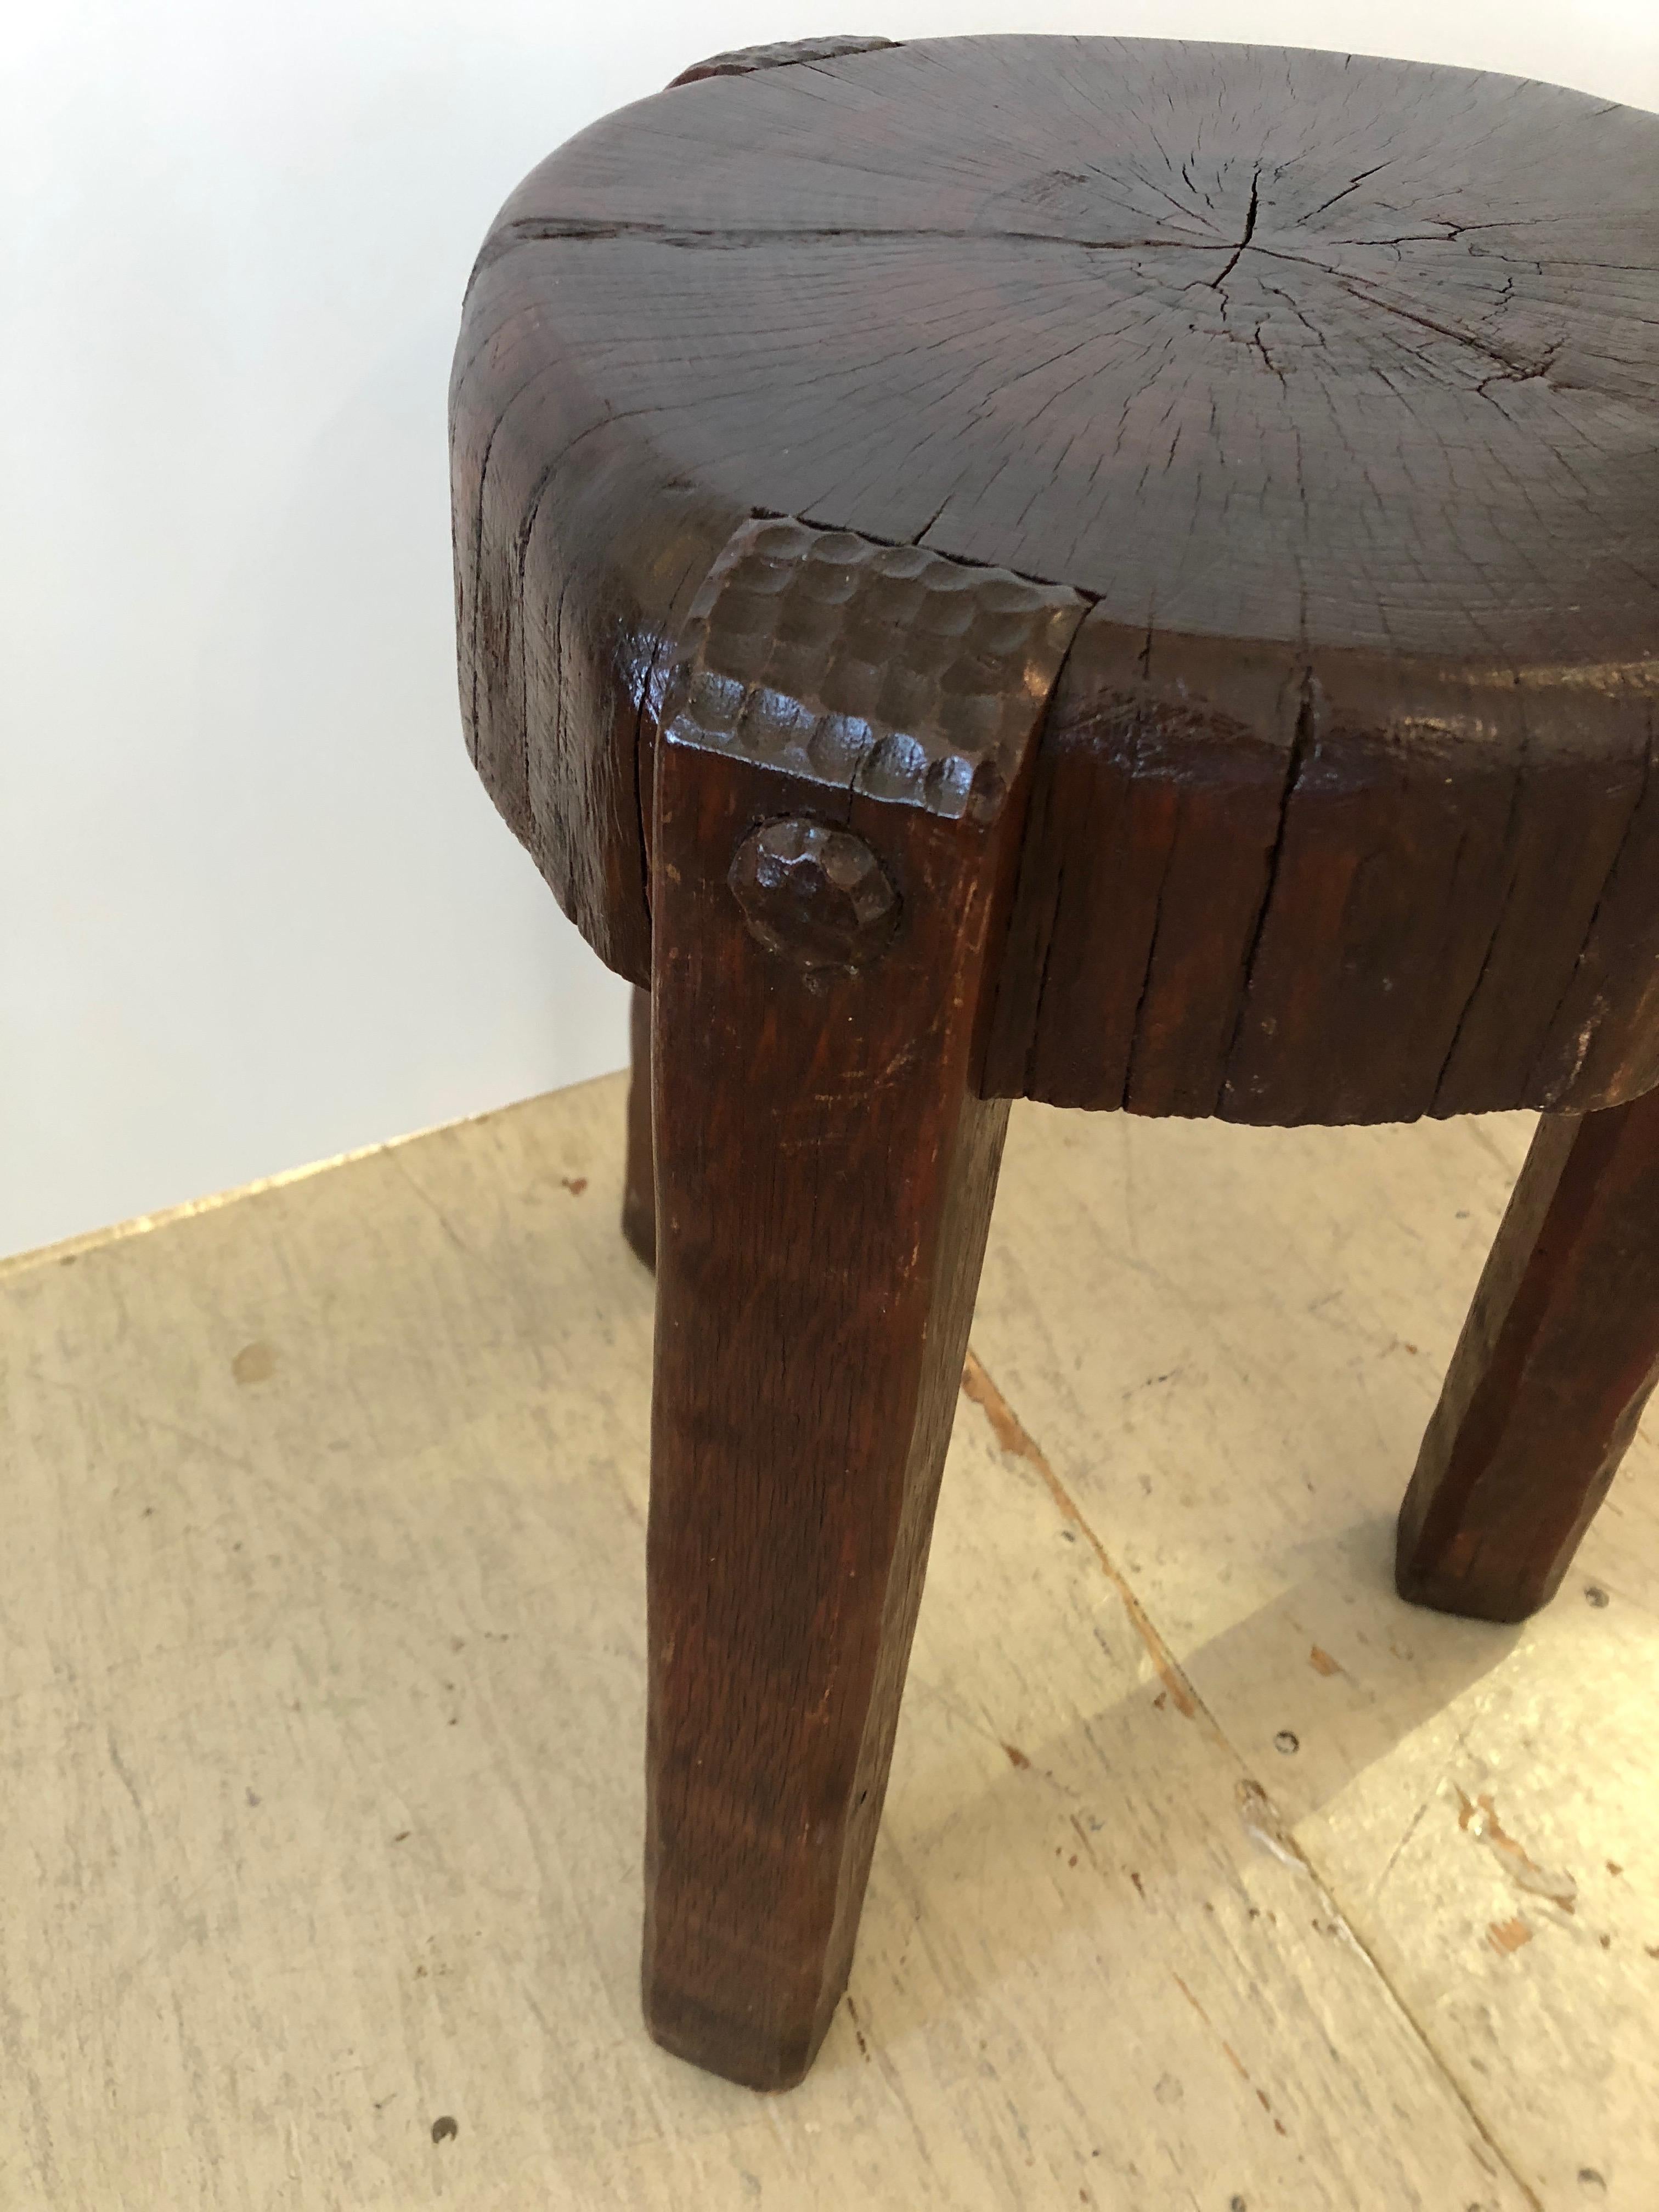 Beautifully crafted handmade Primitive Arts & Crafts folk style round end table or drinks table having a thick oak slab top with gorgeous grain. The legs have wooden pegs and wonderful carving at the top.